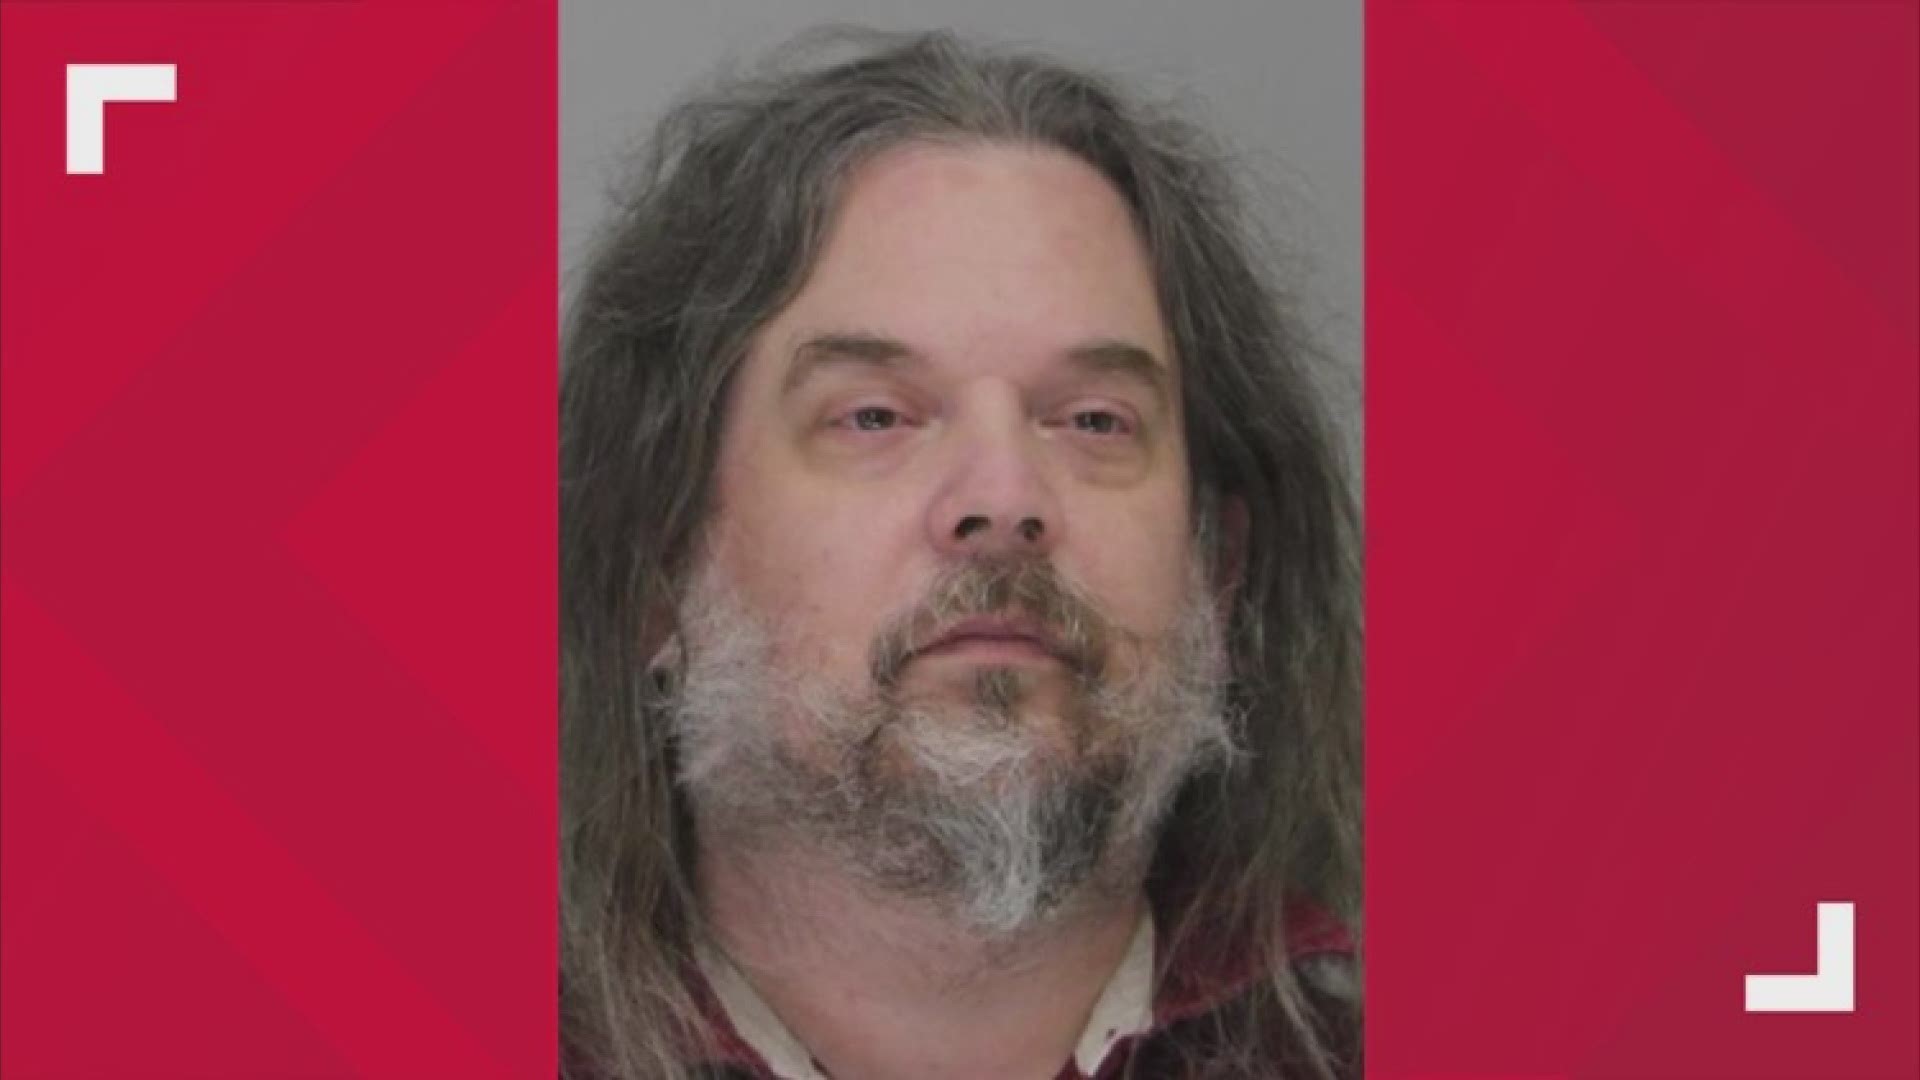 Arron Von Blackwolf, 46, was arrested for multiple counts of Continuous Sexual Abuse of Young Children and Continuous Trafficking of Persons.